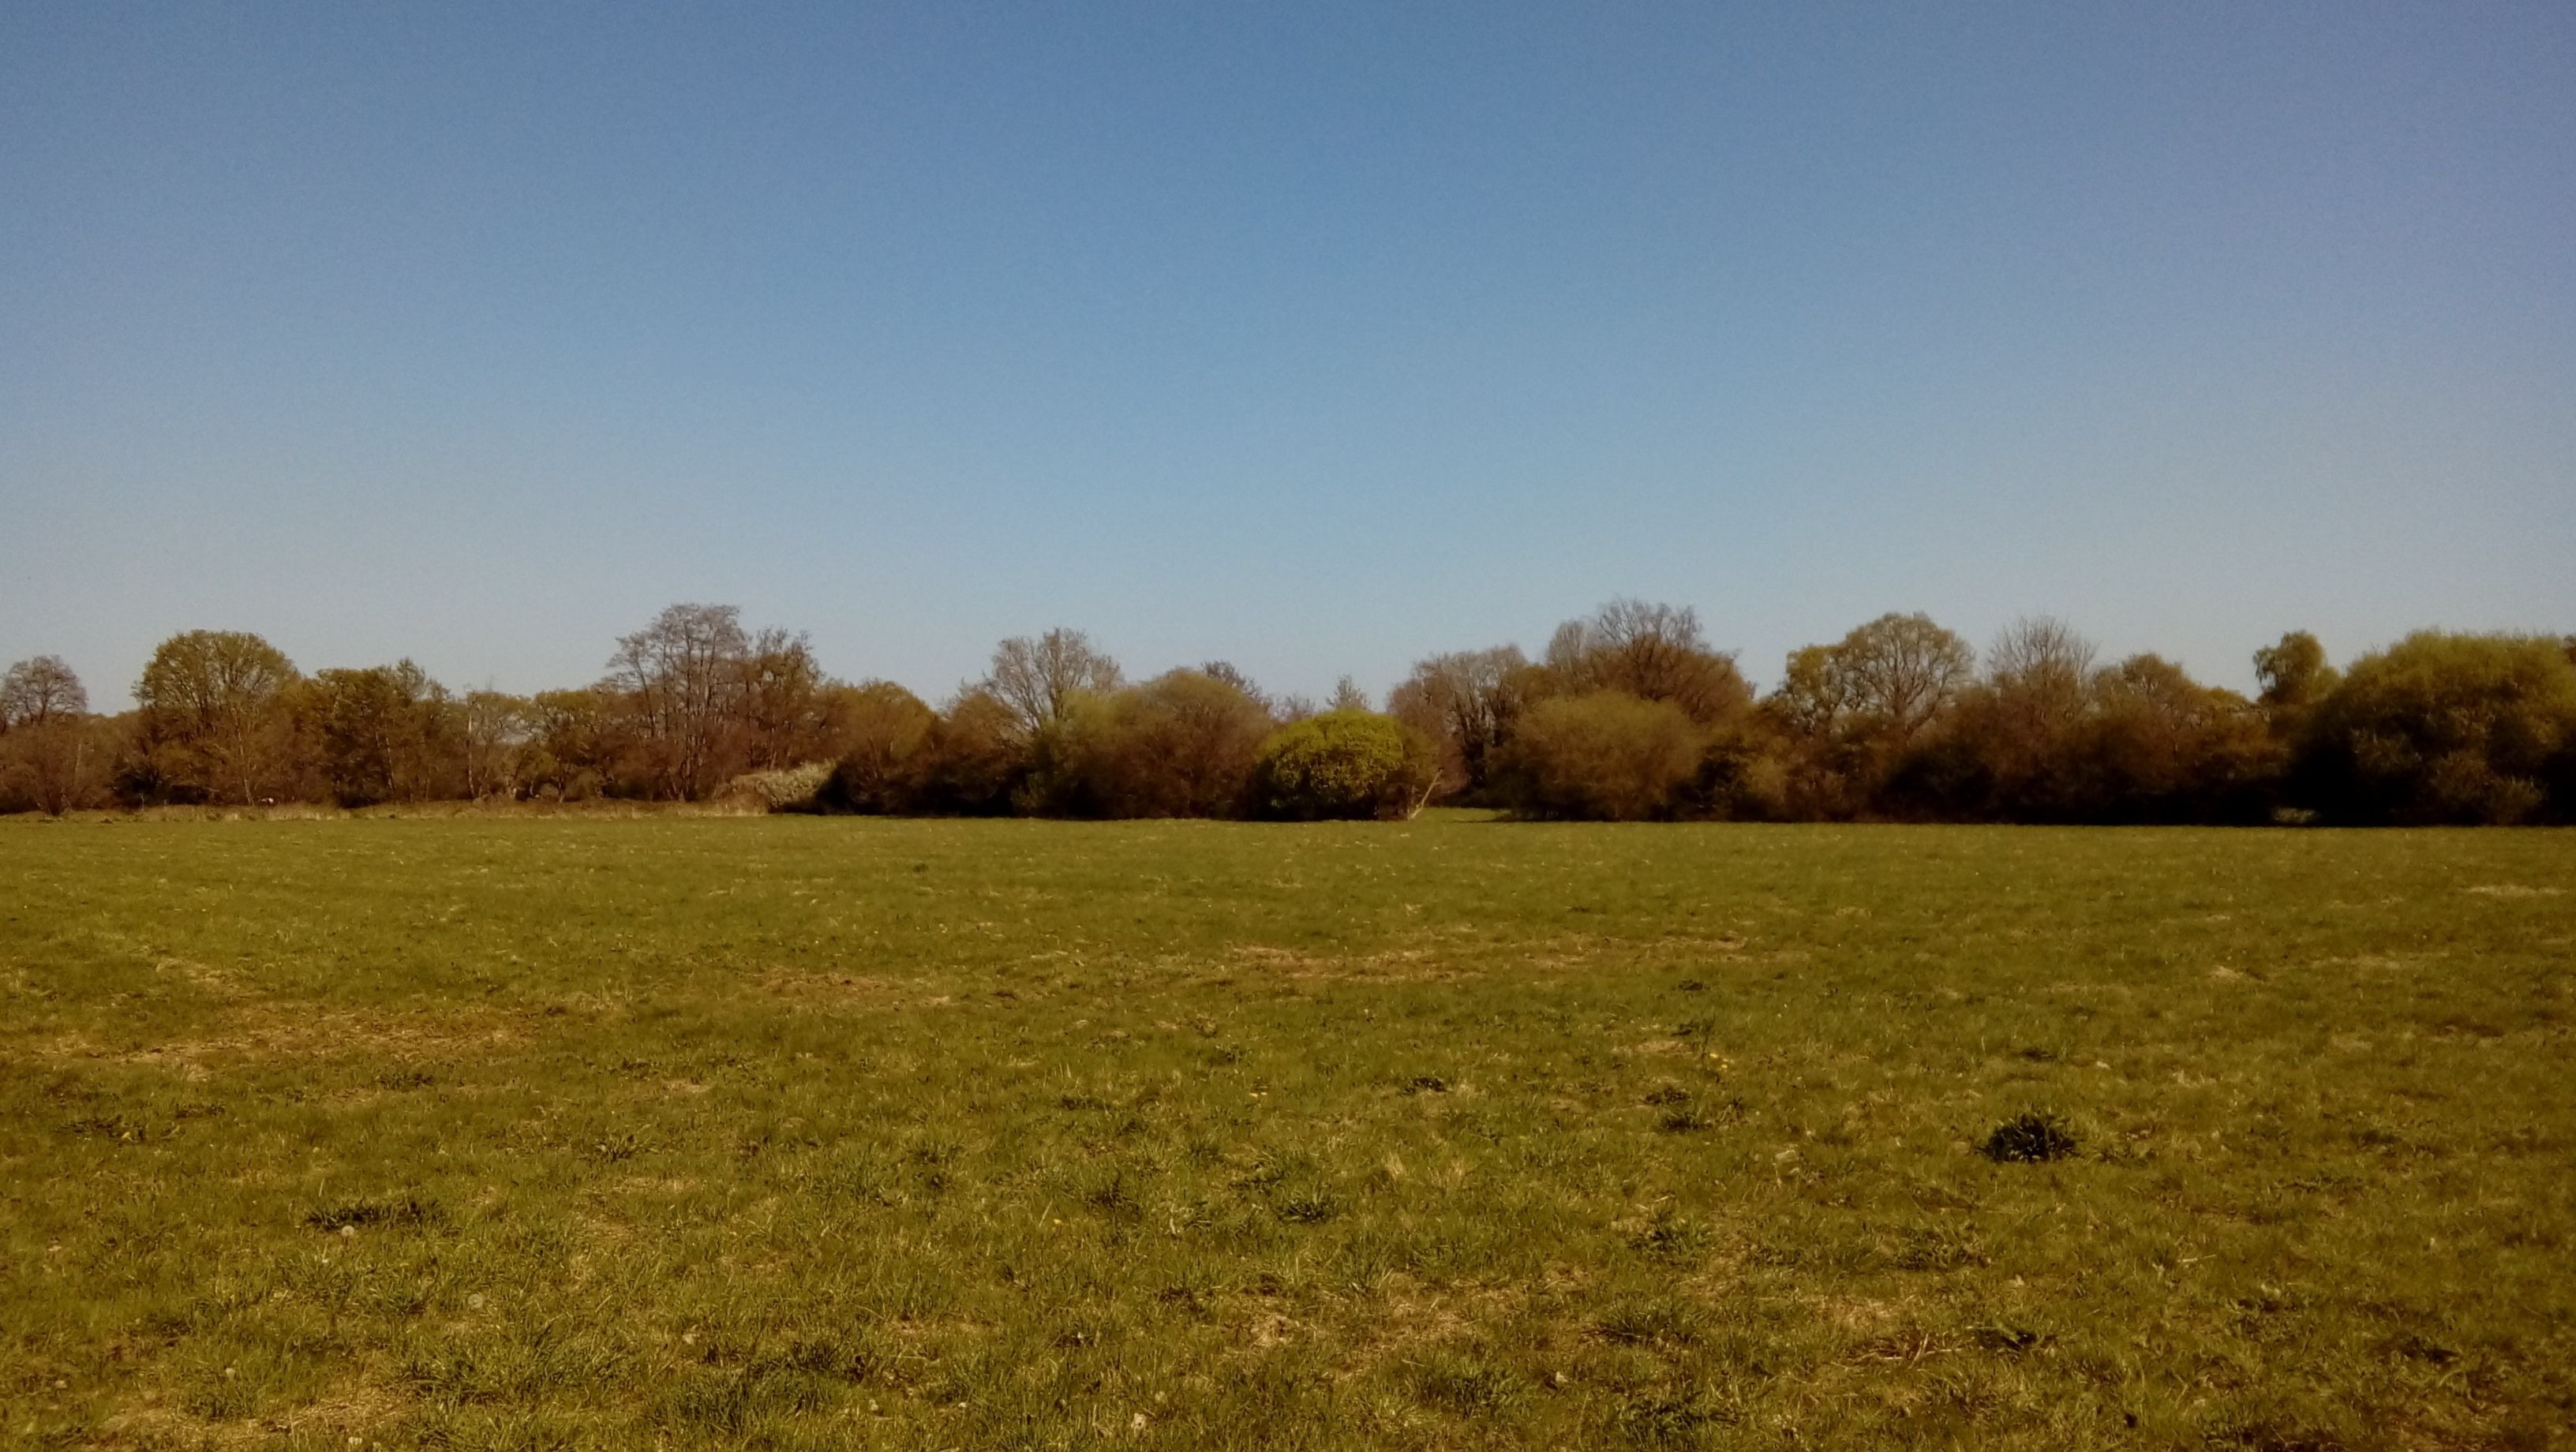 A grassy meadow with bushes in the background under a blue sky on a spring day. Chobham, Surrey.